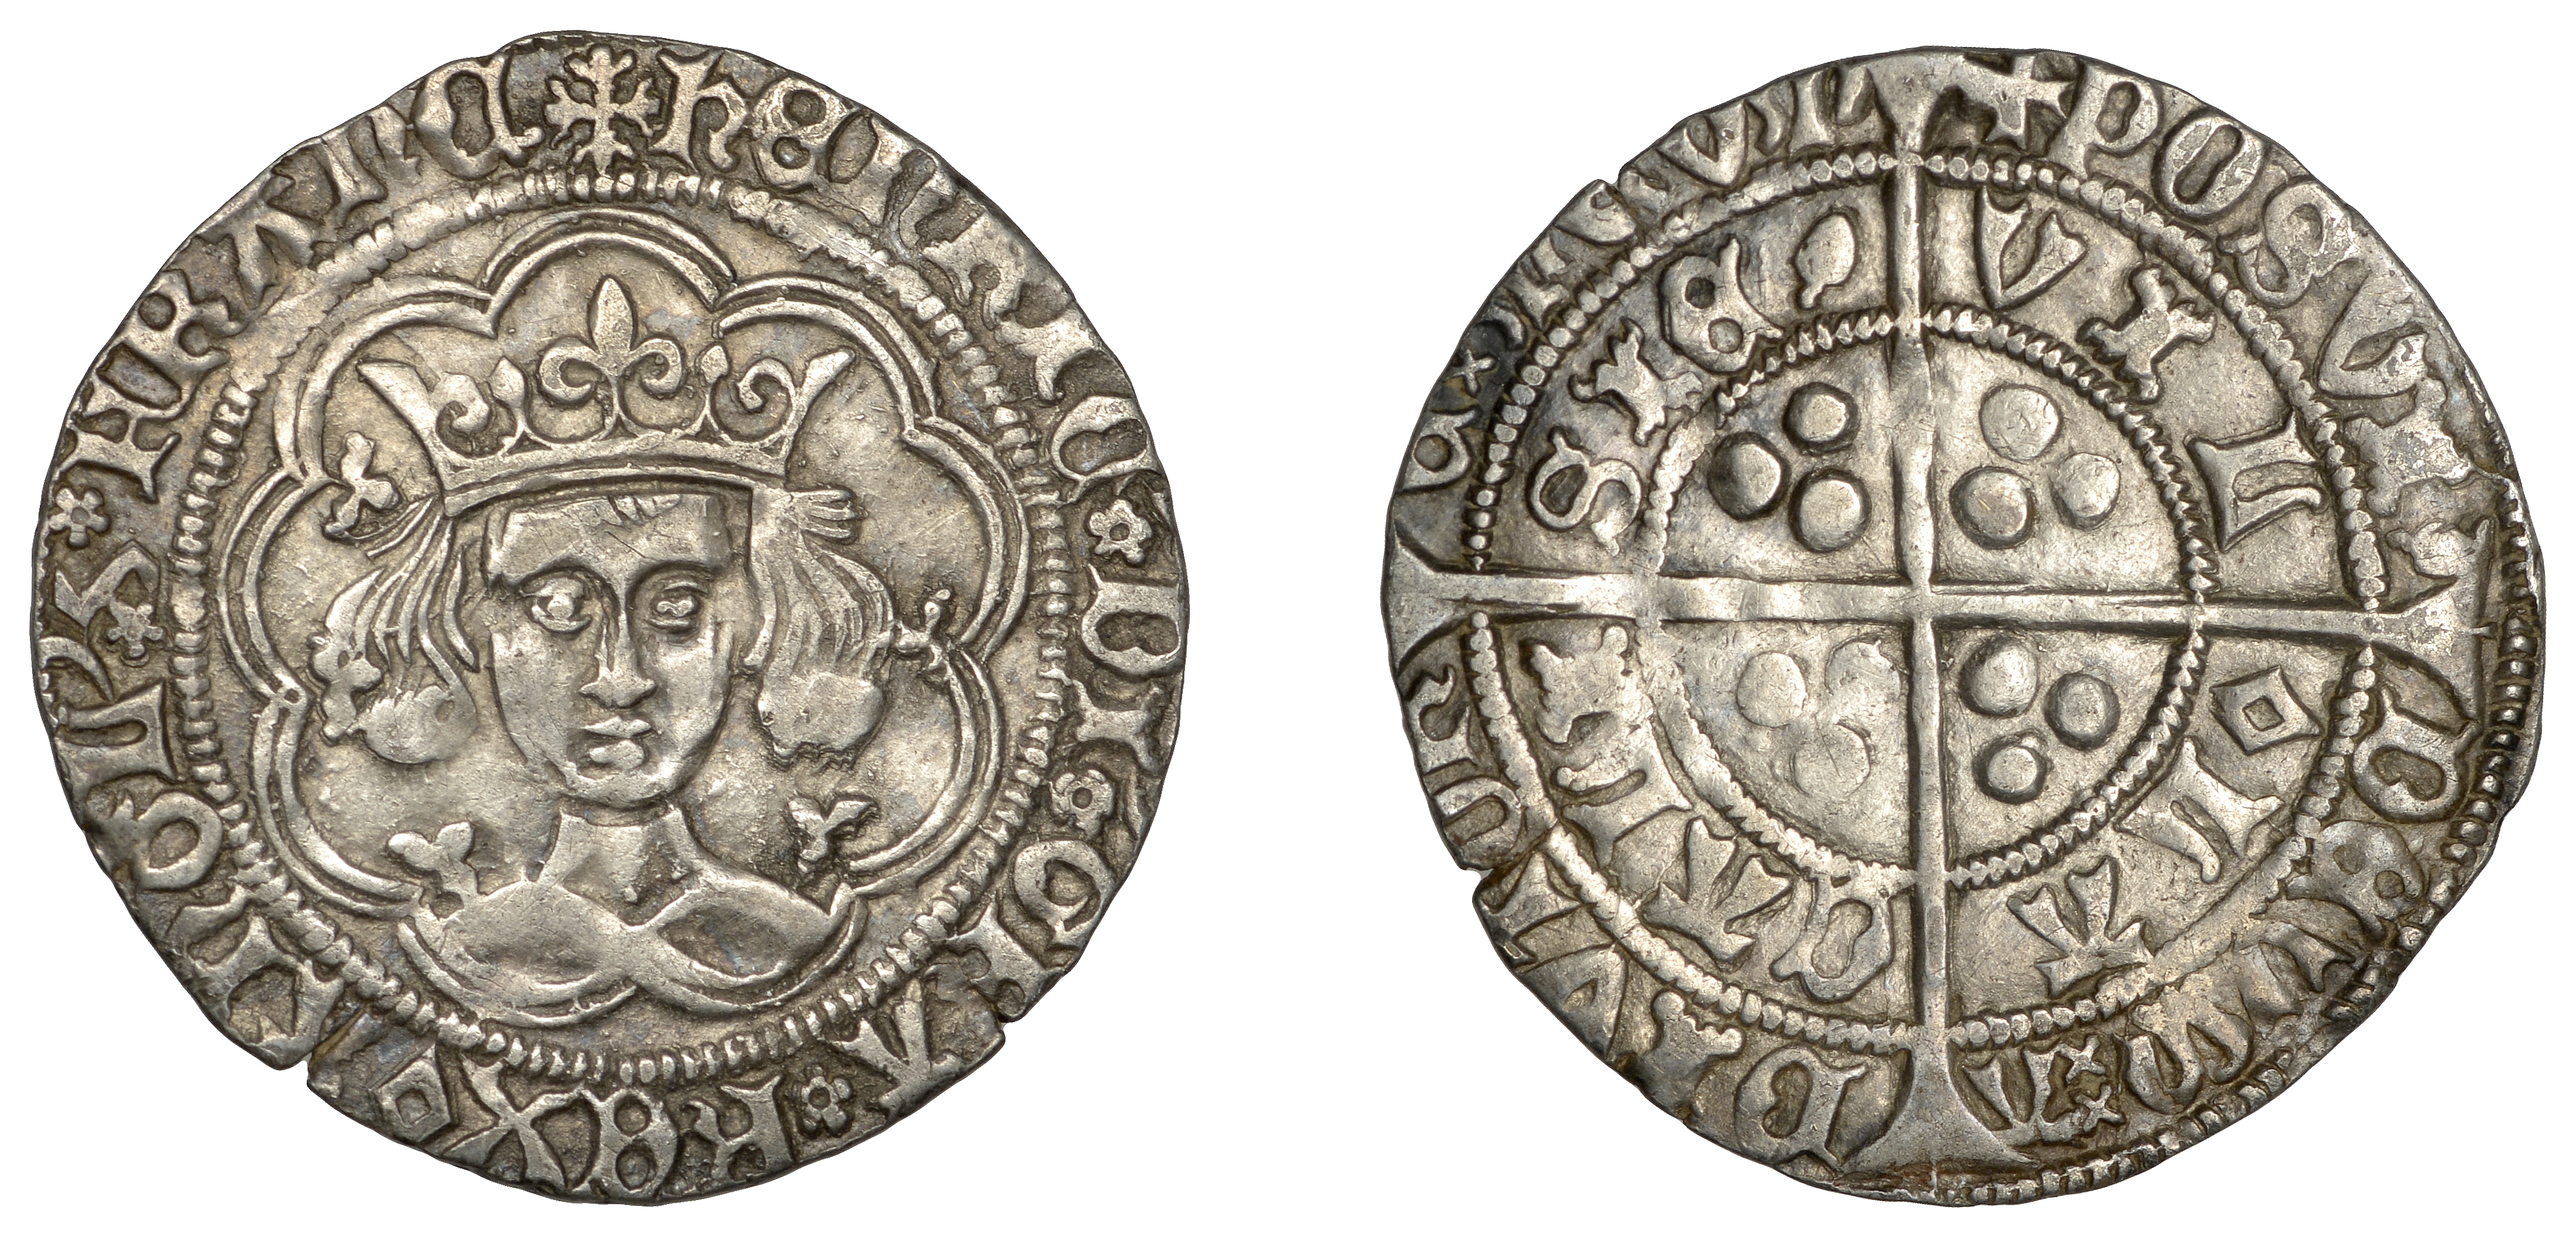 Henry VI (First reign, 1422-1461), Rosette-Mascle/Pinecone-Mascle mule, Groat, Calais, mm. c...